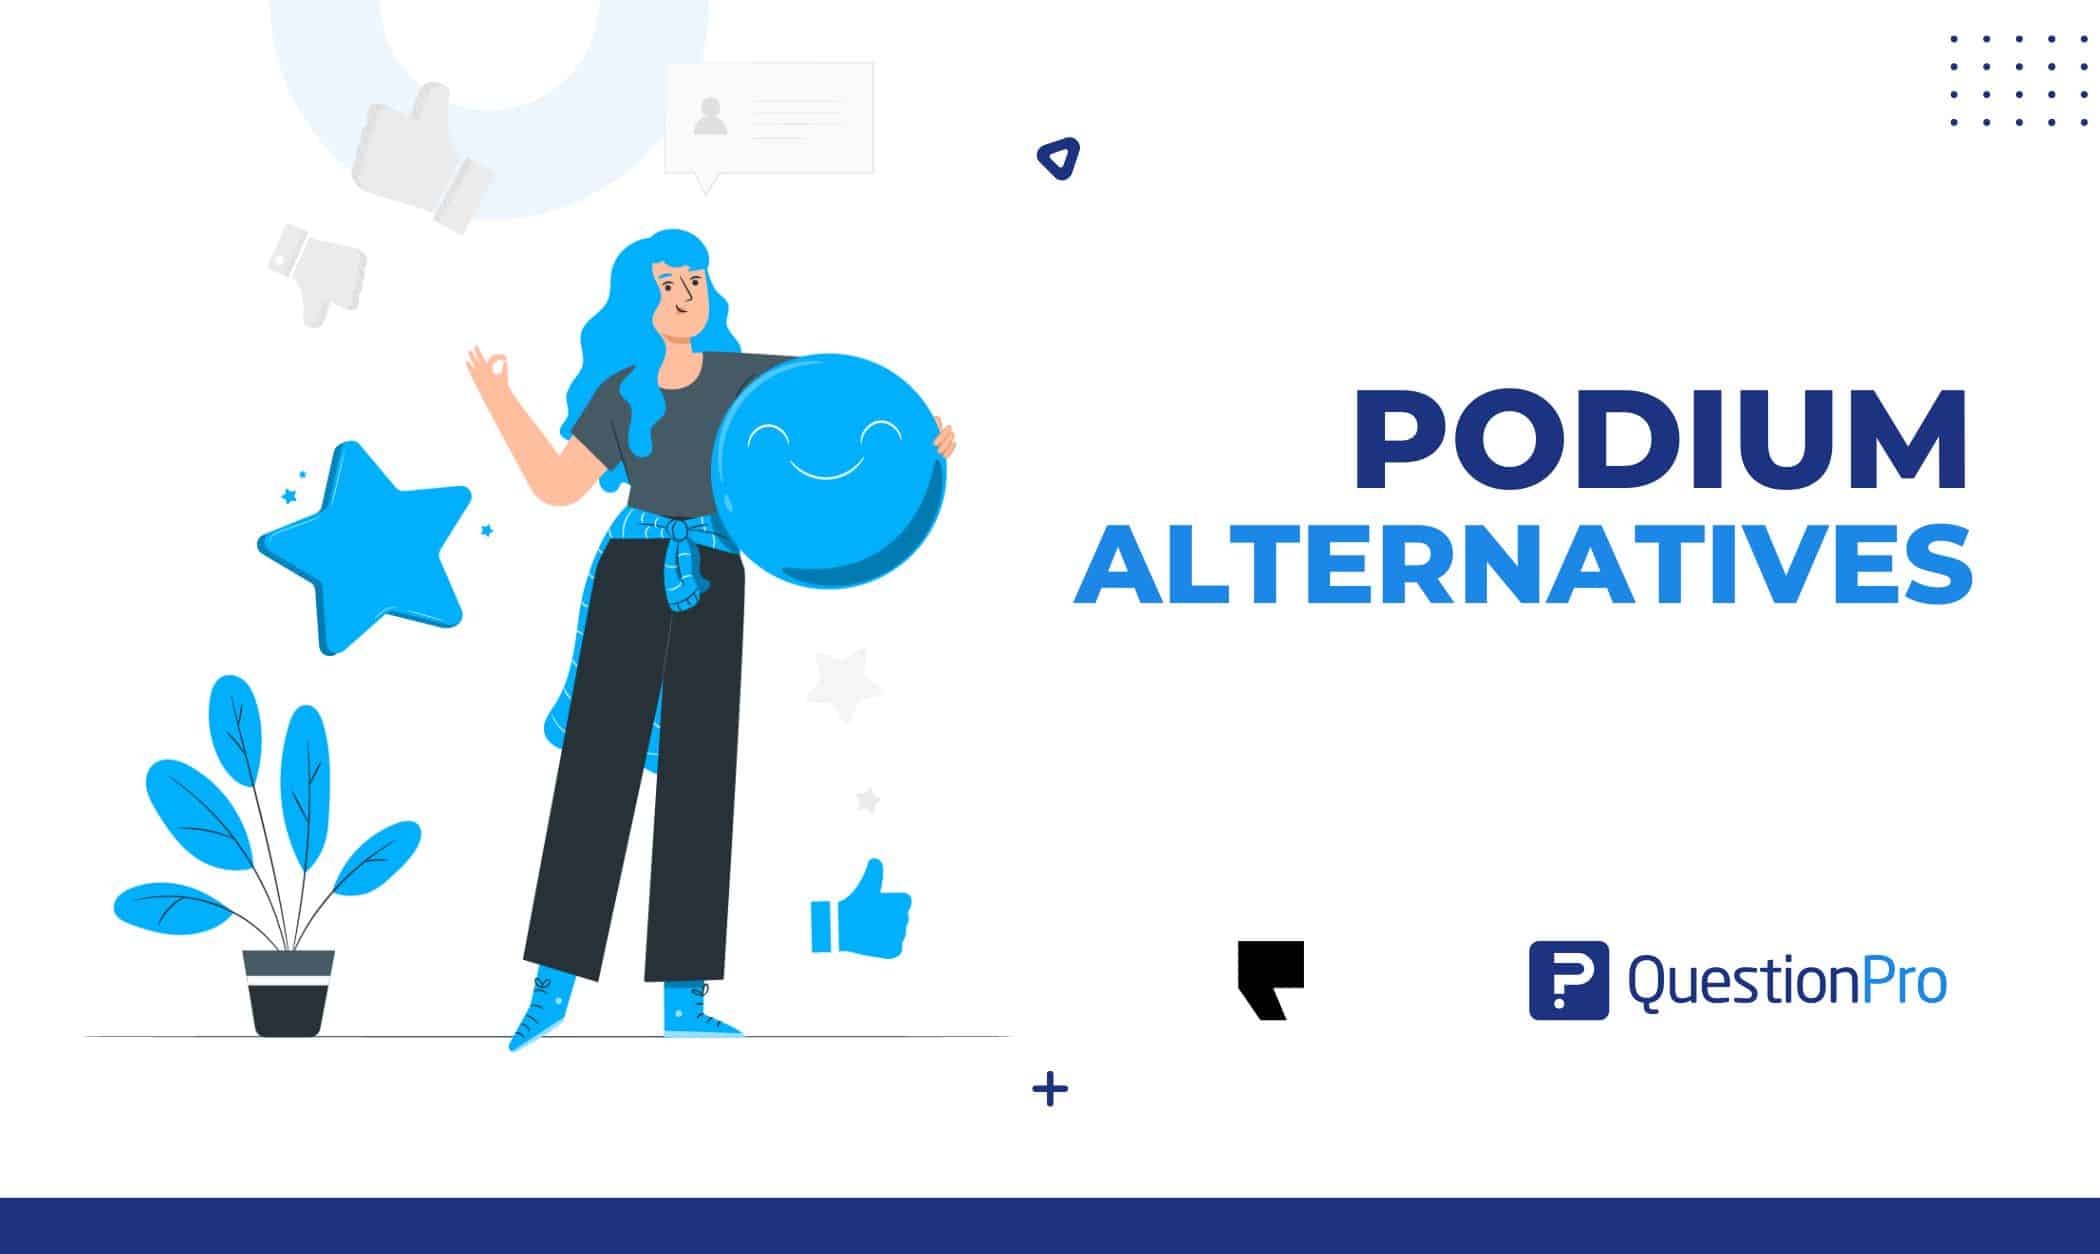 Find a more advanced and stronger Podium alternative that meets your needs. Let's look at the top 10 Podium alternatives for your business.